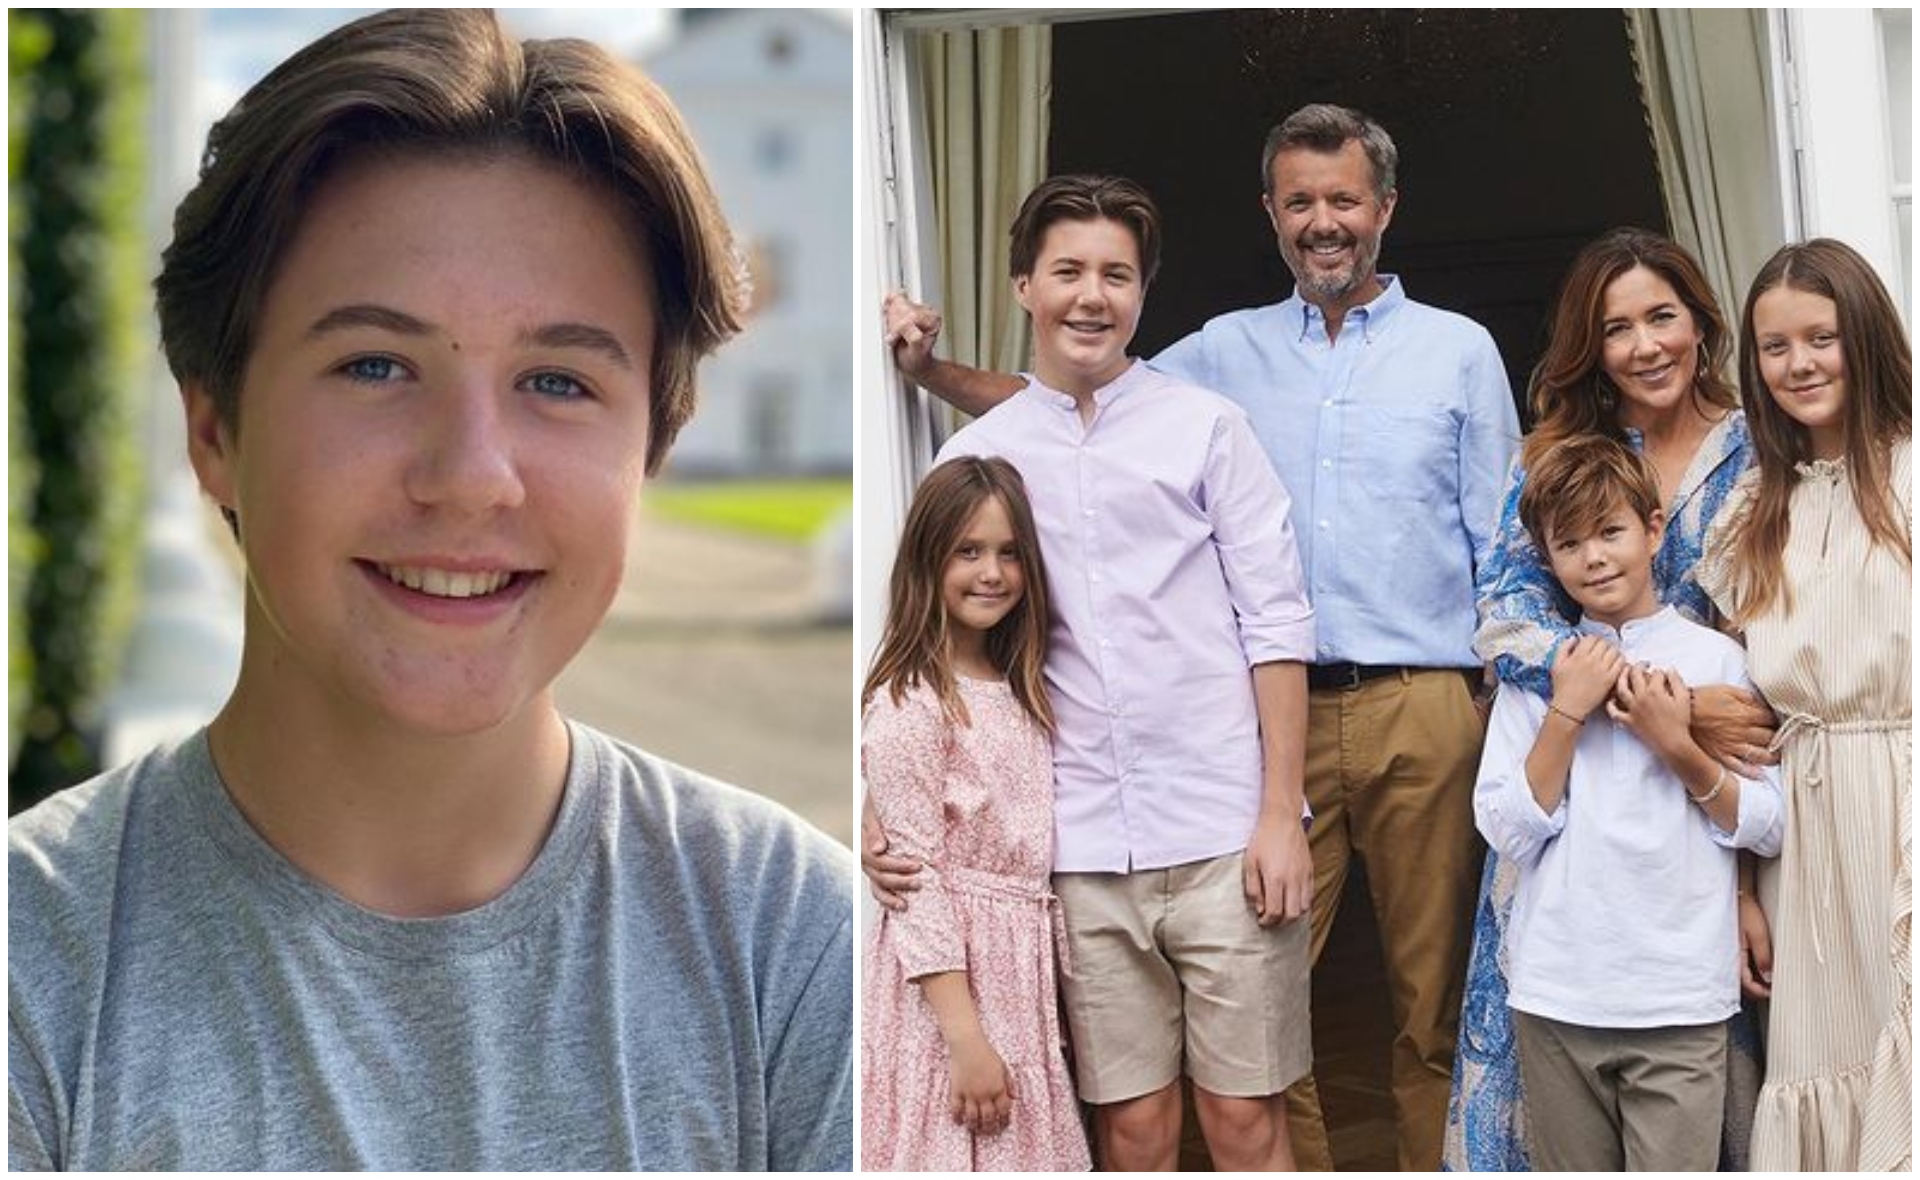 Crown Princess Mary’s eldest son and future King, Prince Christian, set to celebrate an important religious milestone this year